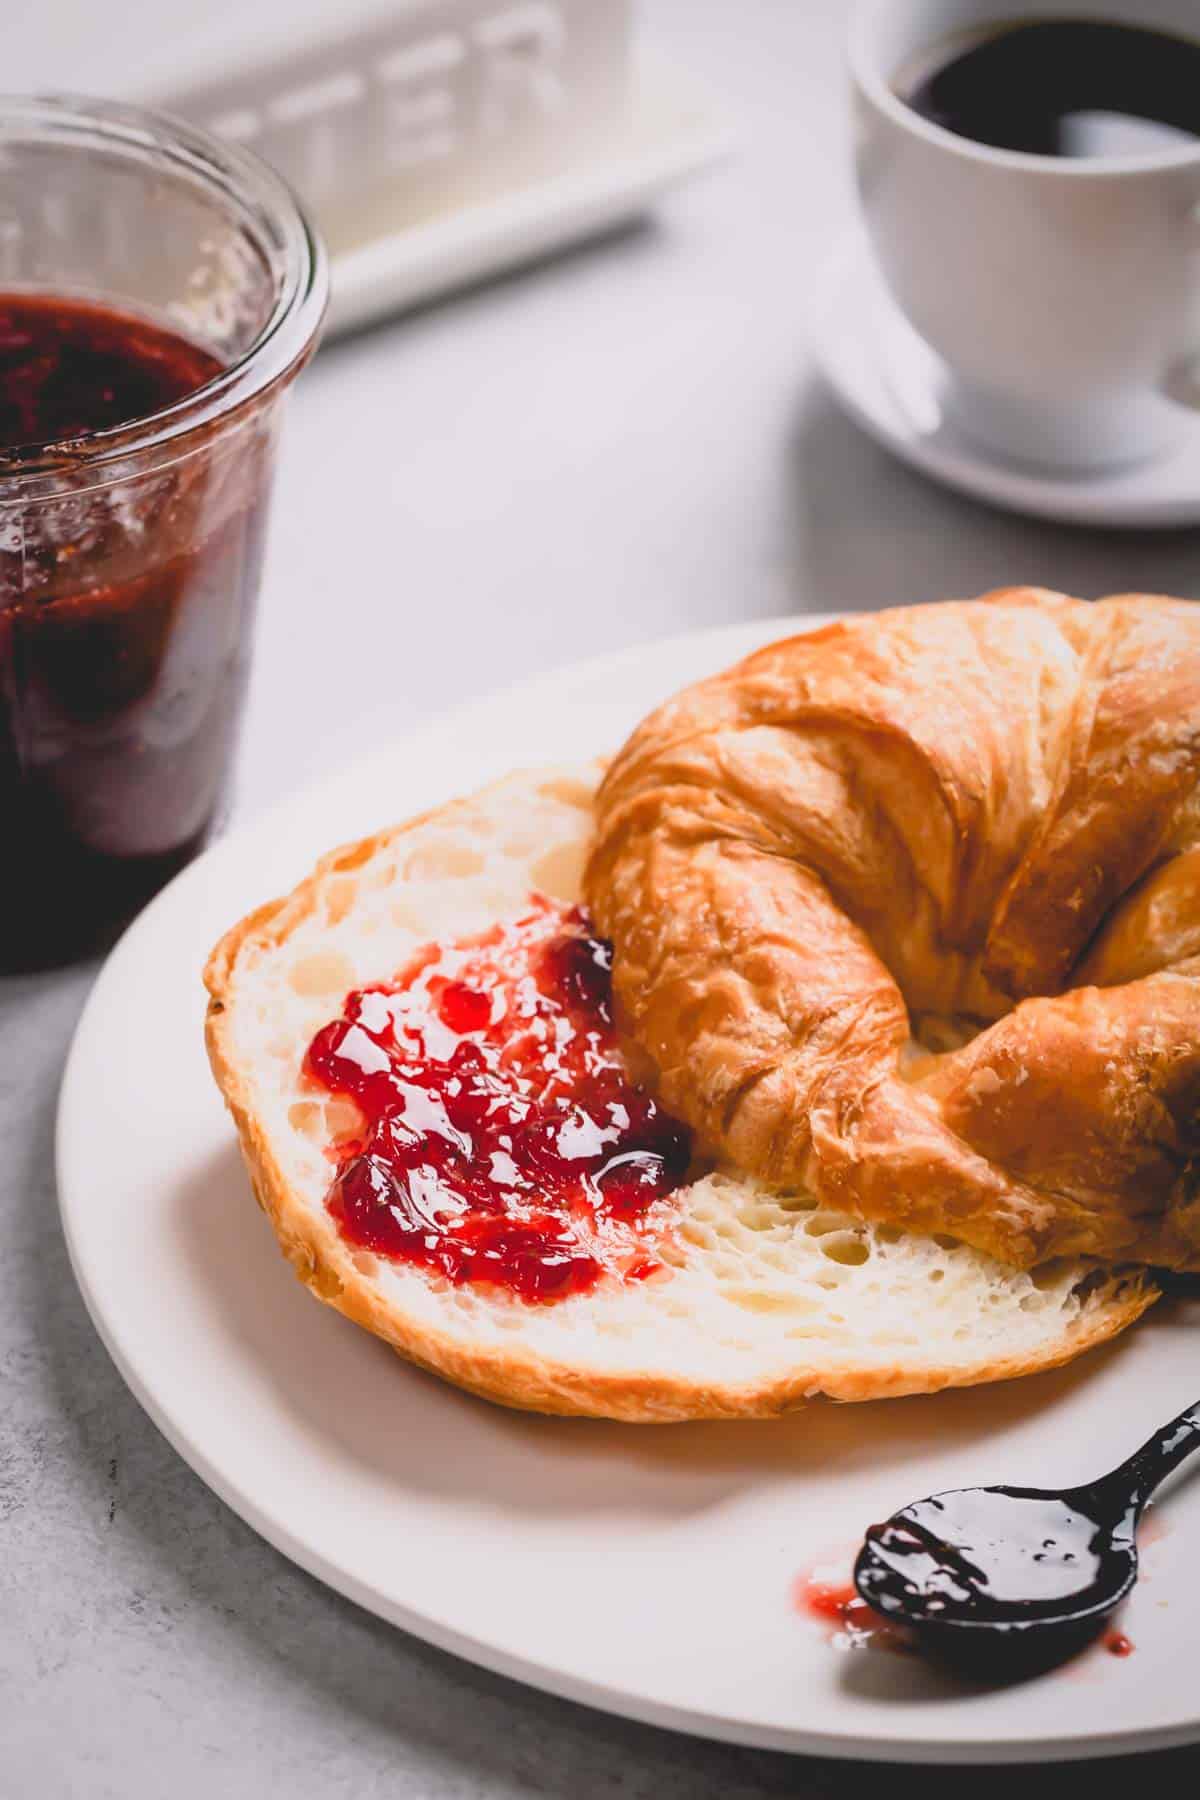 Sliced croissant with strawberry jam.